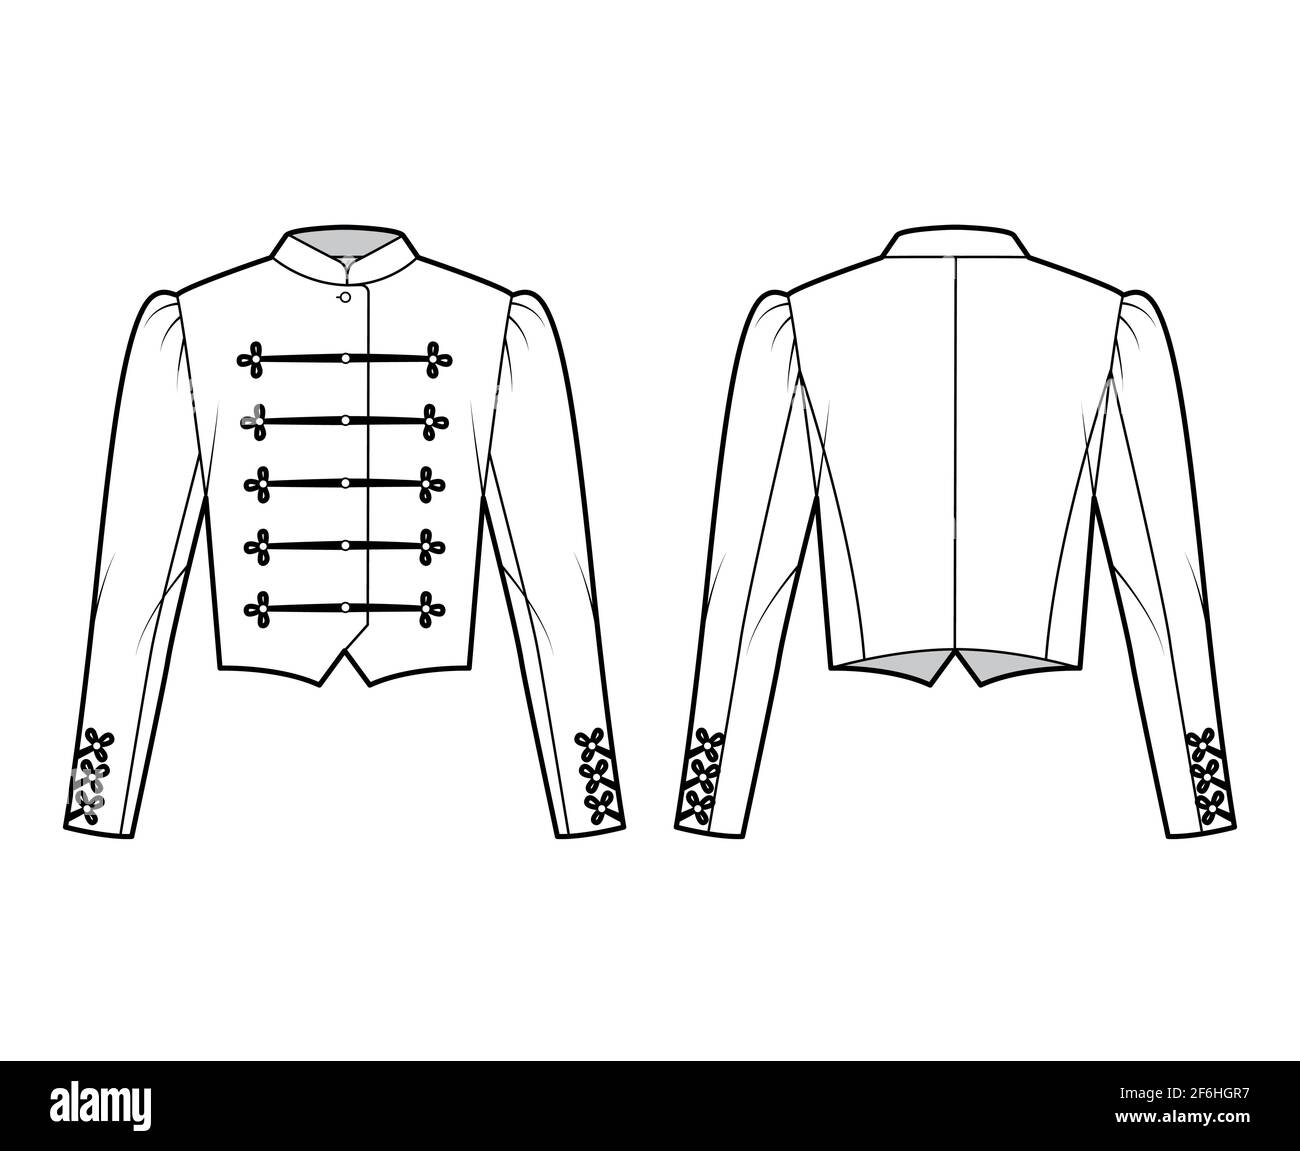 Majorette jacket technical fashion illustration with crop length, long leg  o Mutton sleeves, stand collar, button